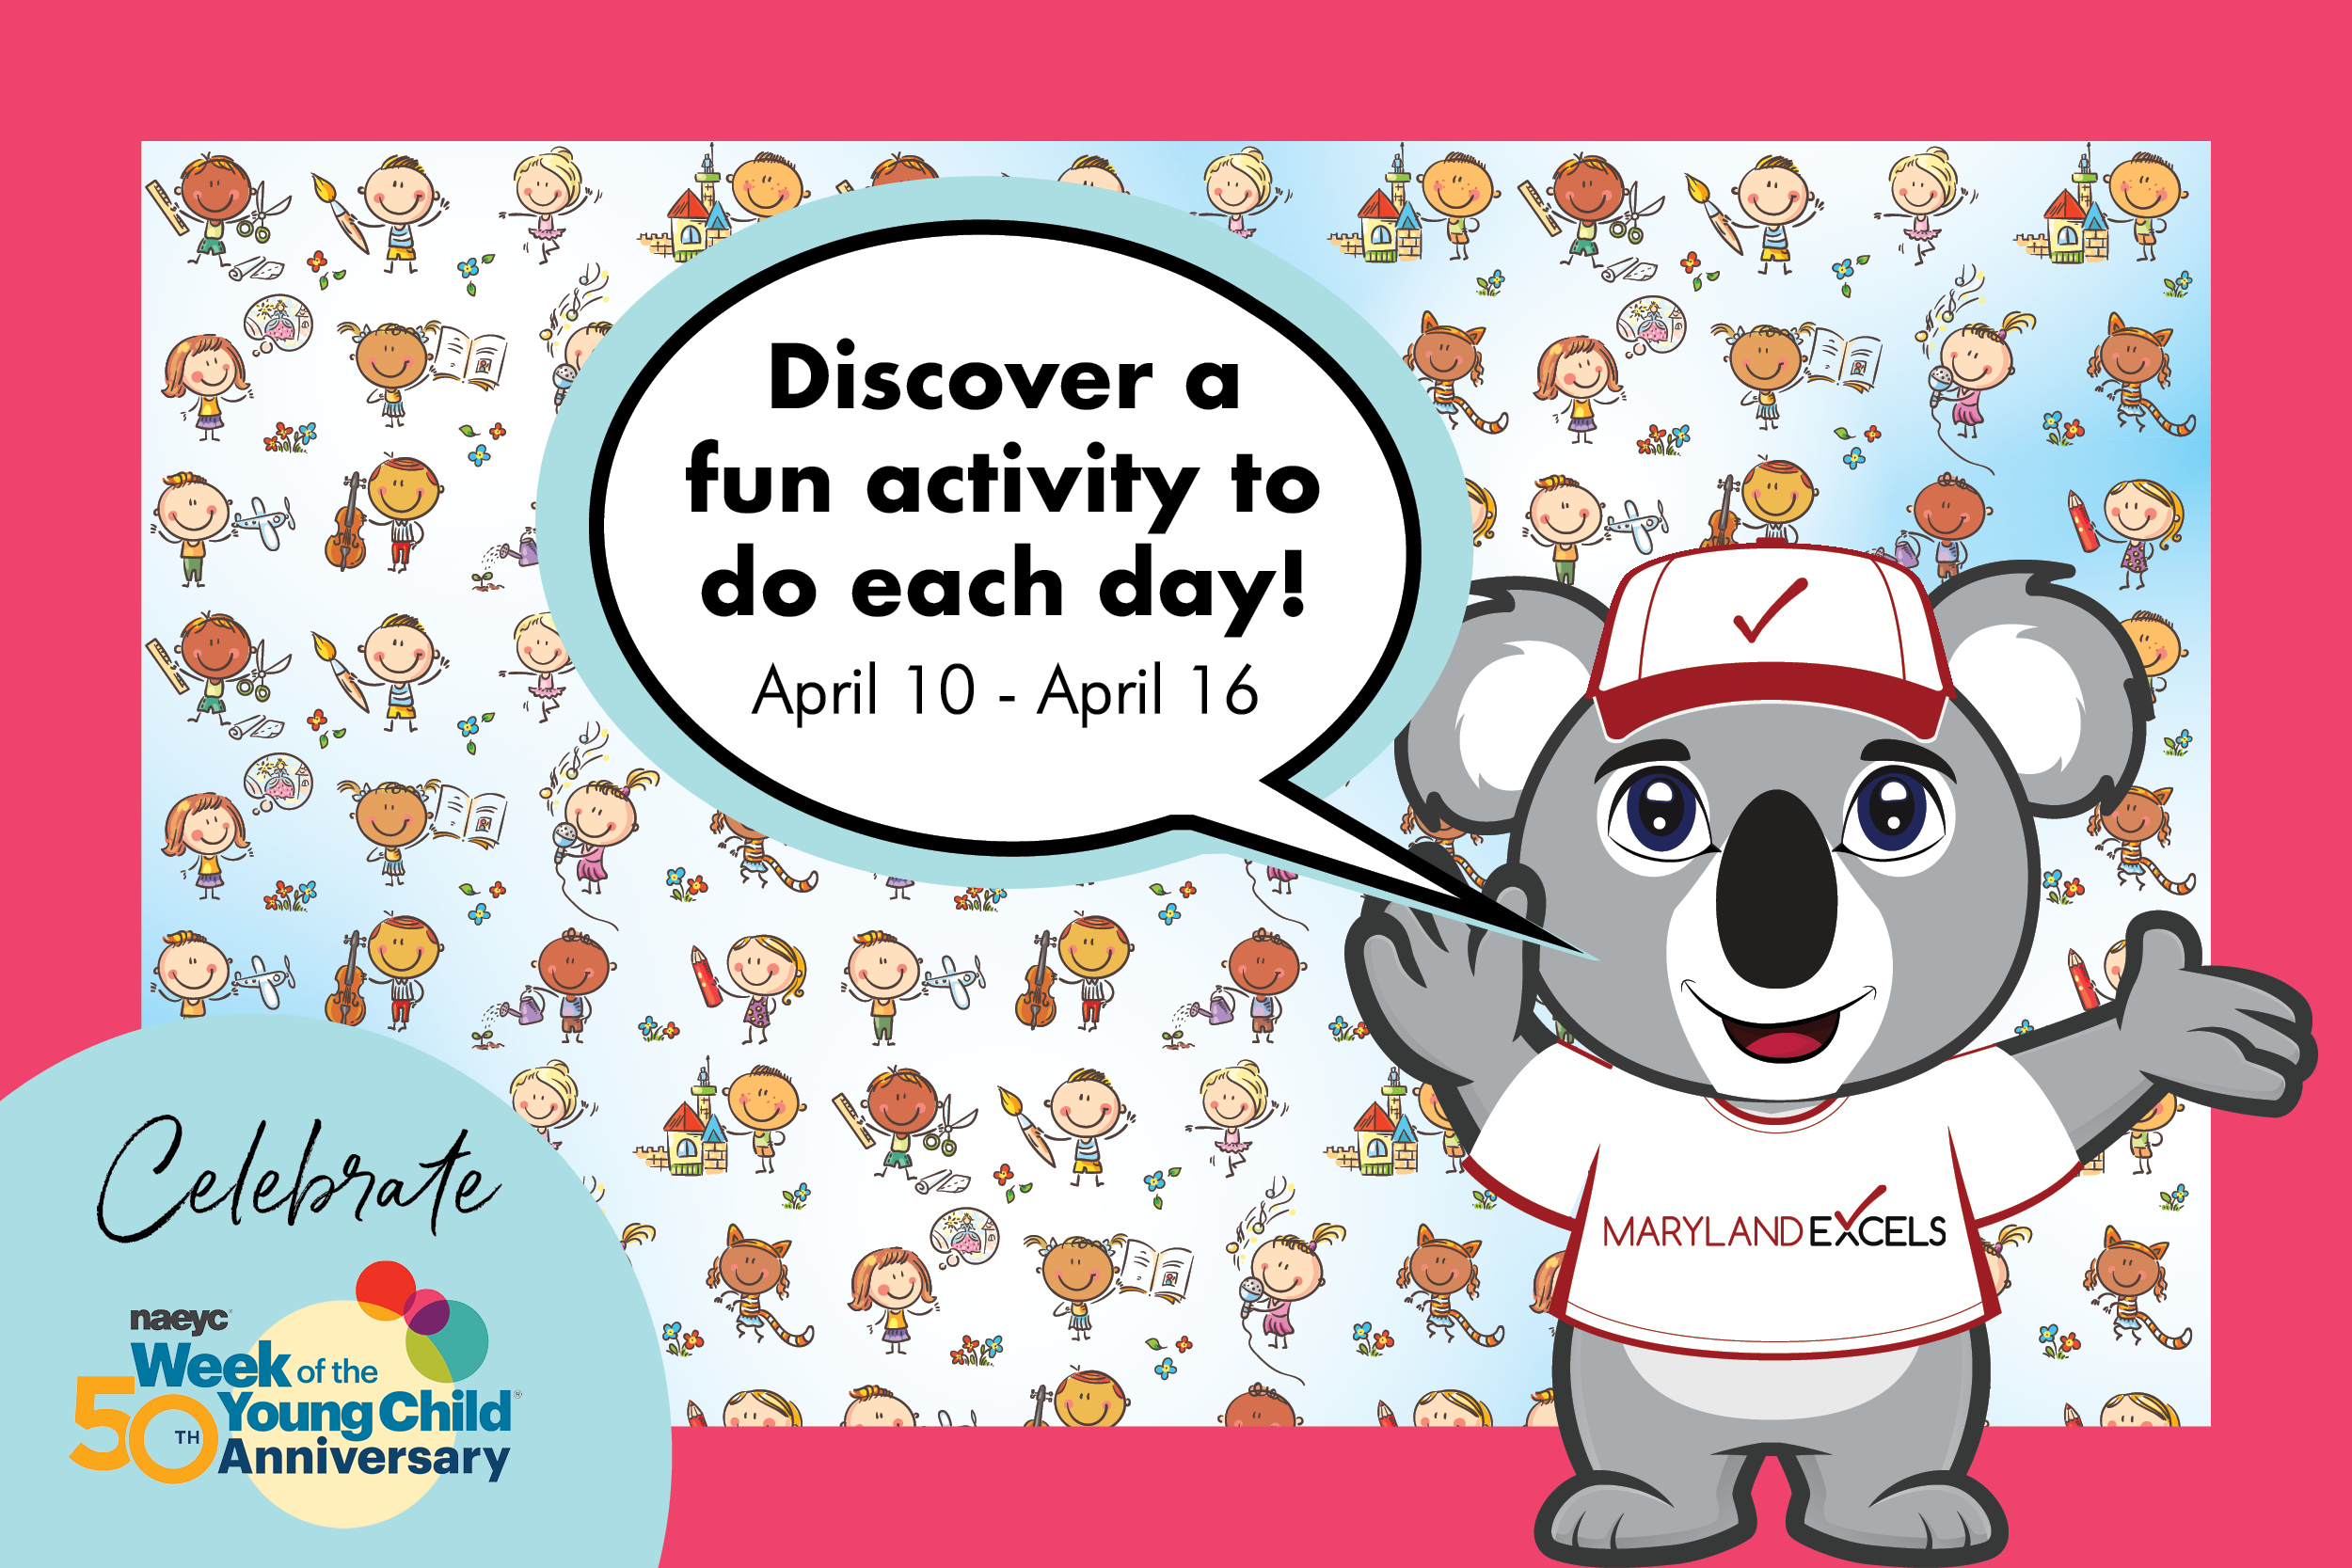 Celebrate the 50th Anniversary of the Week of the Young Child and discover a fun activity to do each day, April 10 through April 16